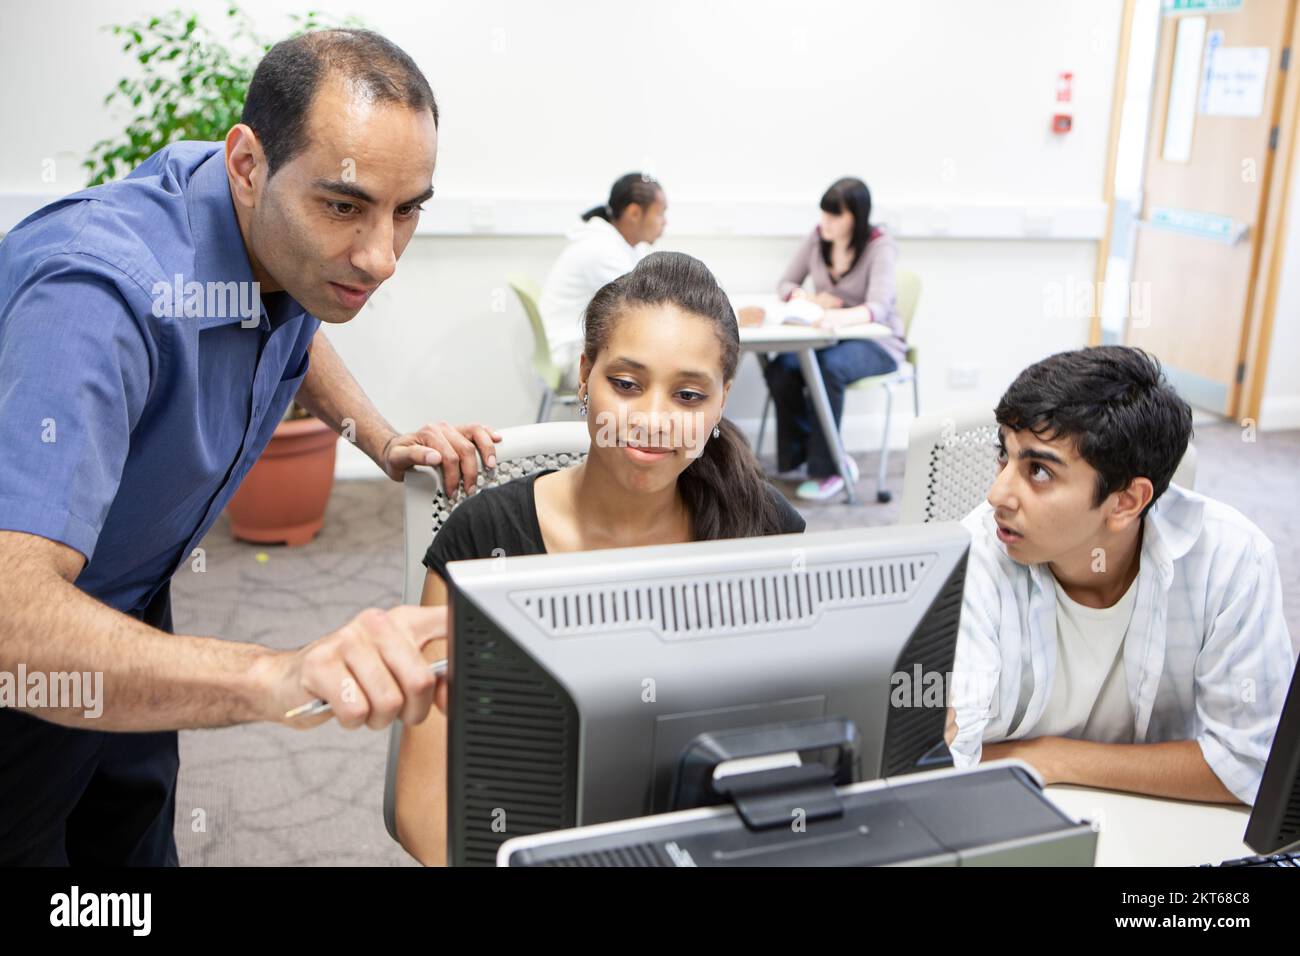 Computer Studies; Online Learning. A teacher helping his late-teenage student understand an academic problem. From a series of related images. Stock Photo